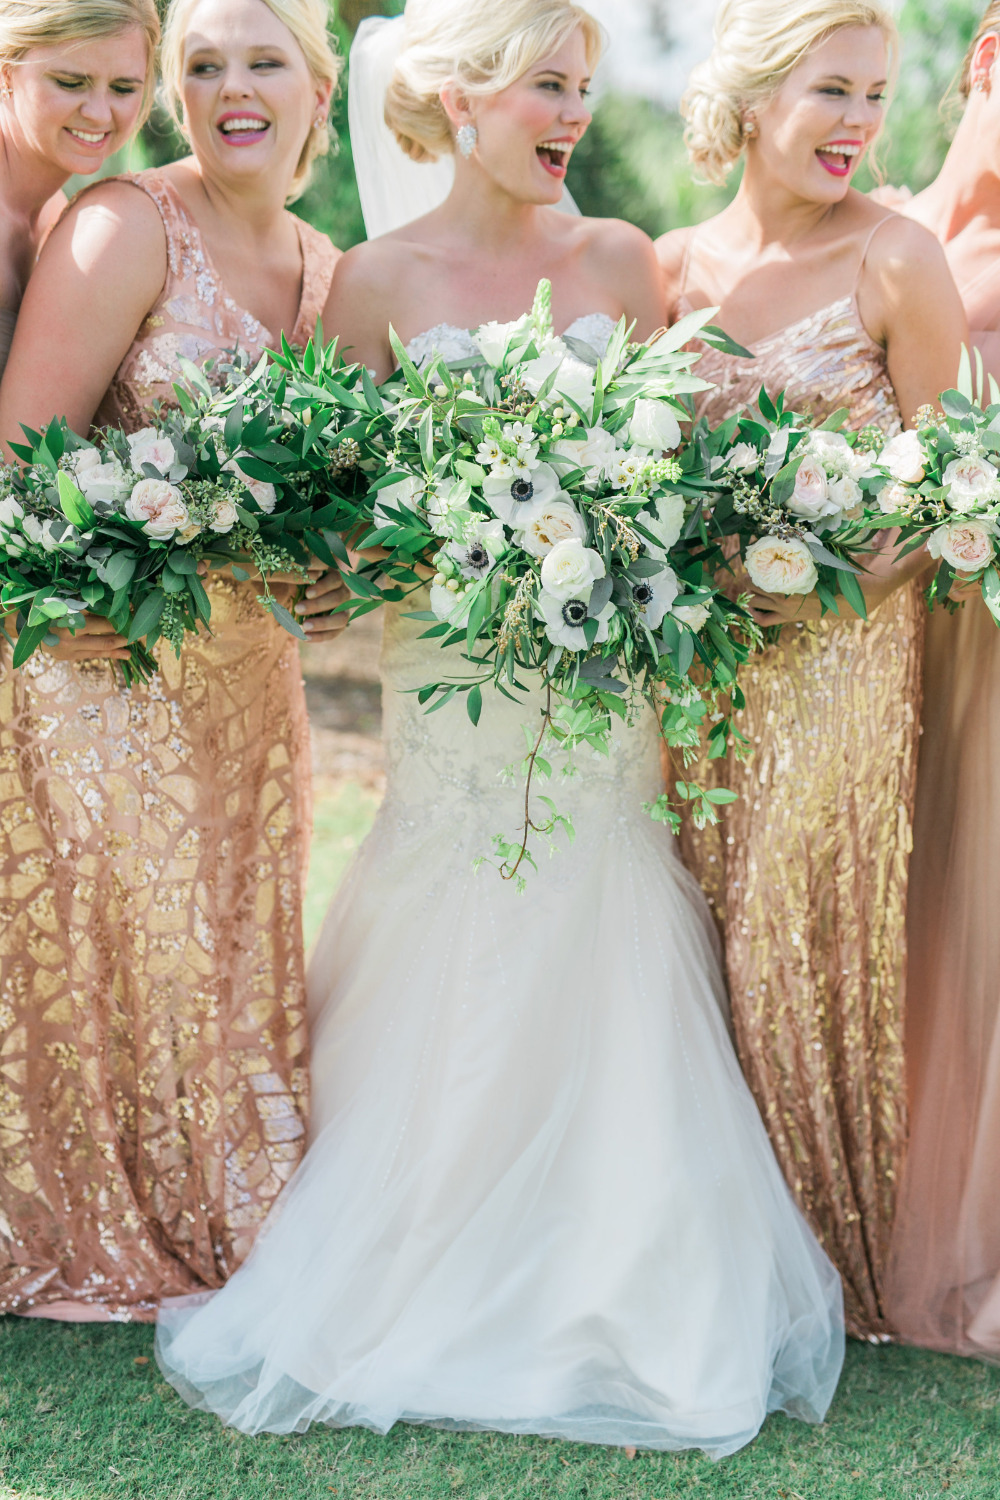 fun bridesmaids photo with pink and gold dresses